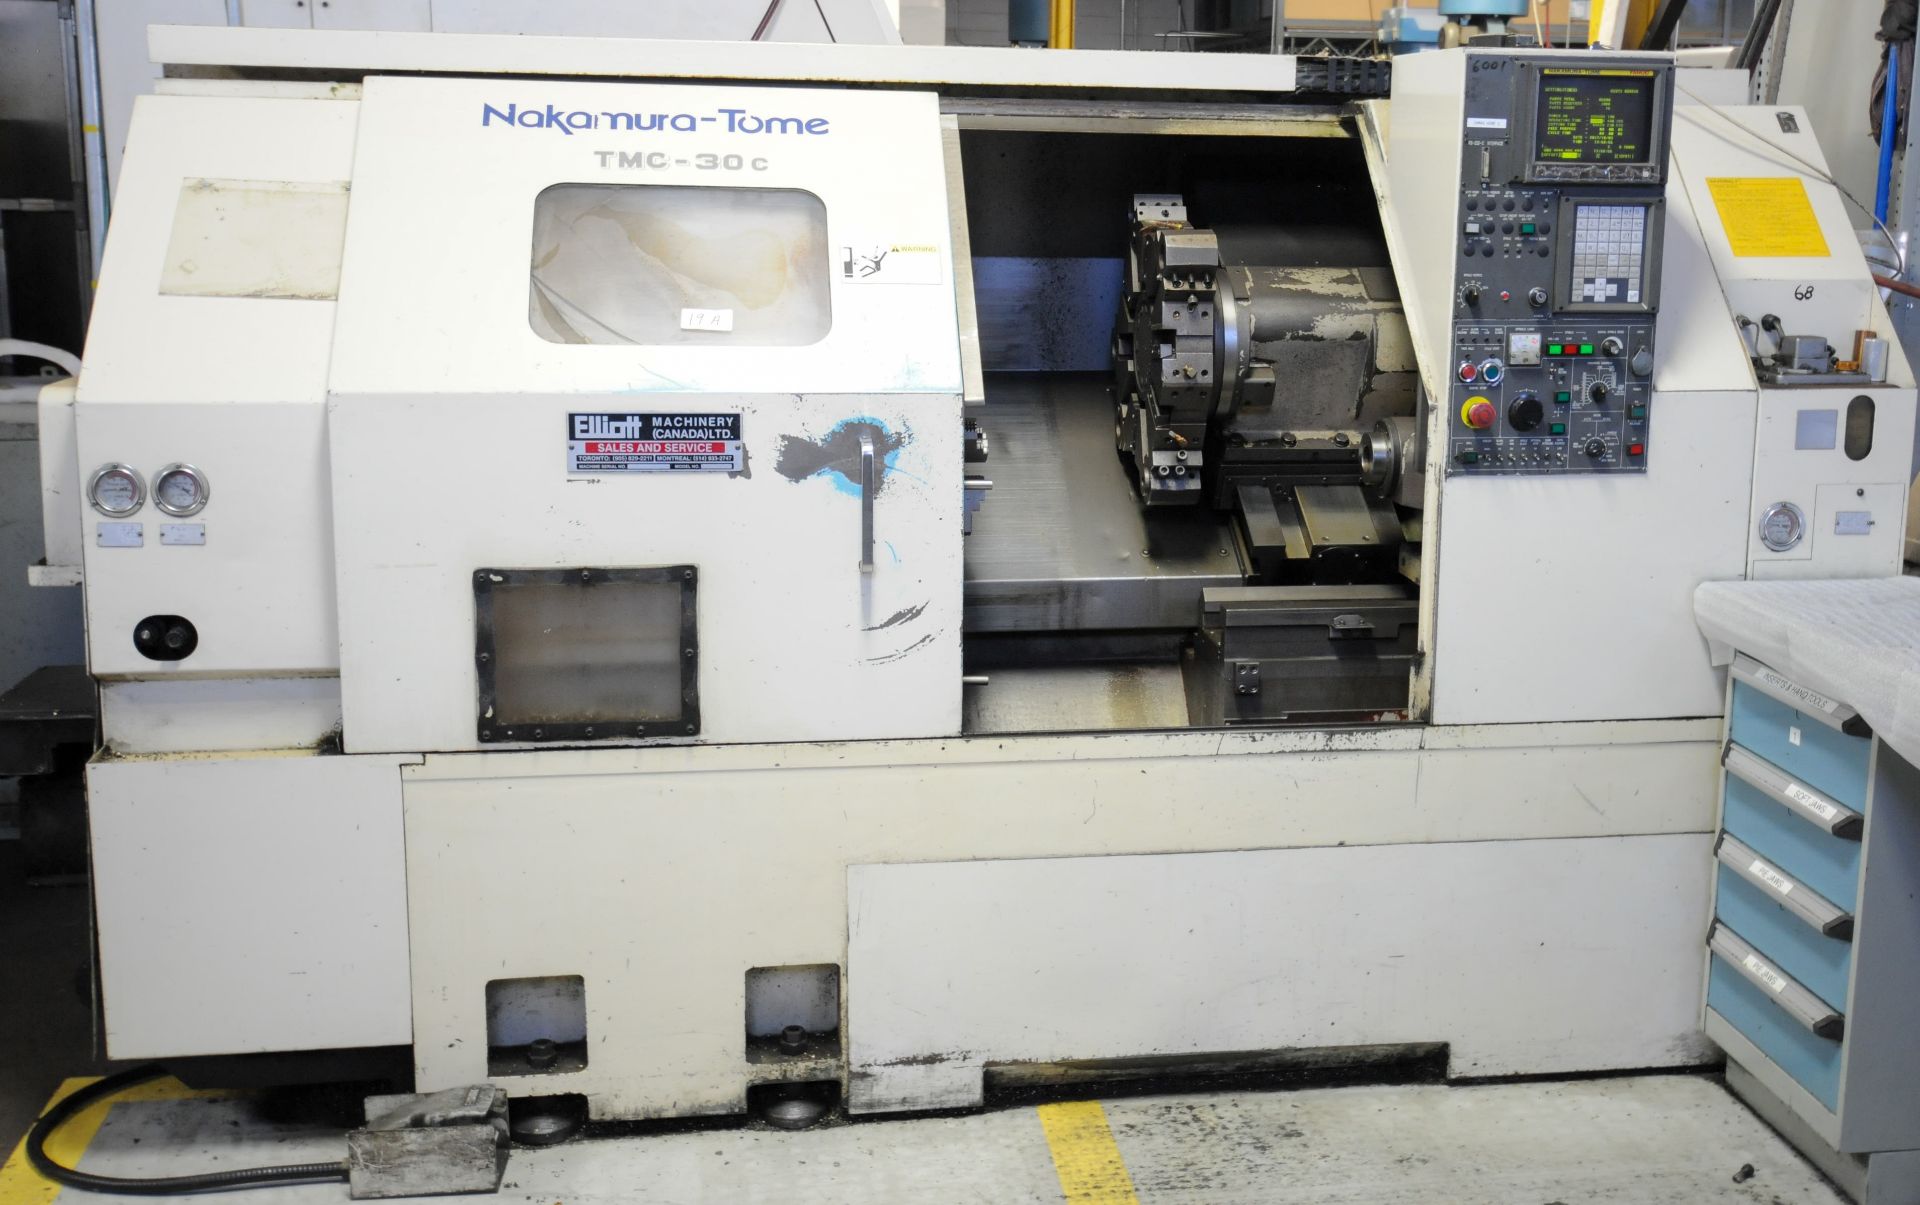 NAKAMURA TOME TMC-30, CNC TURNING CENTERS WITH FANUC CNC CONTROL, 19.69" SWING, 21.65" BETWEEN